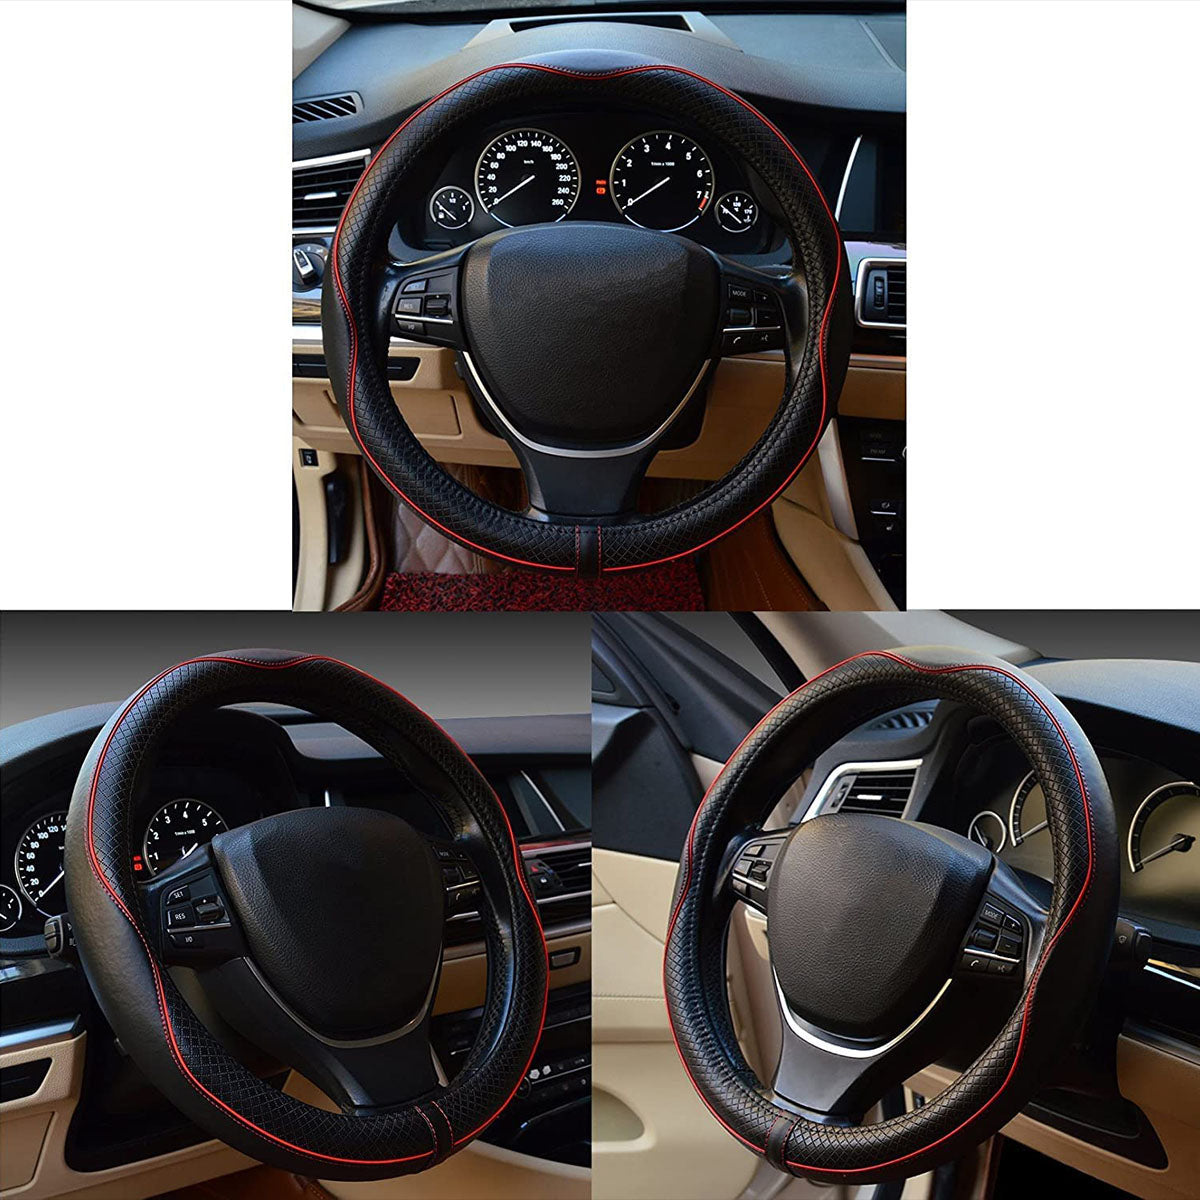 Car Steering Wheel Cover, Custom For Your Cars, Anti-Slip, Safety, Soft, Breathable, Heavy Duty, Thick, Full Surround, Sports Style, Car Accessories AR18990 - Delicate Leather